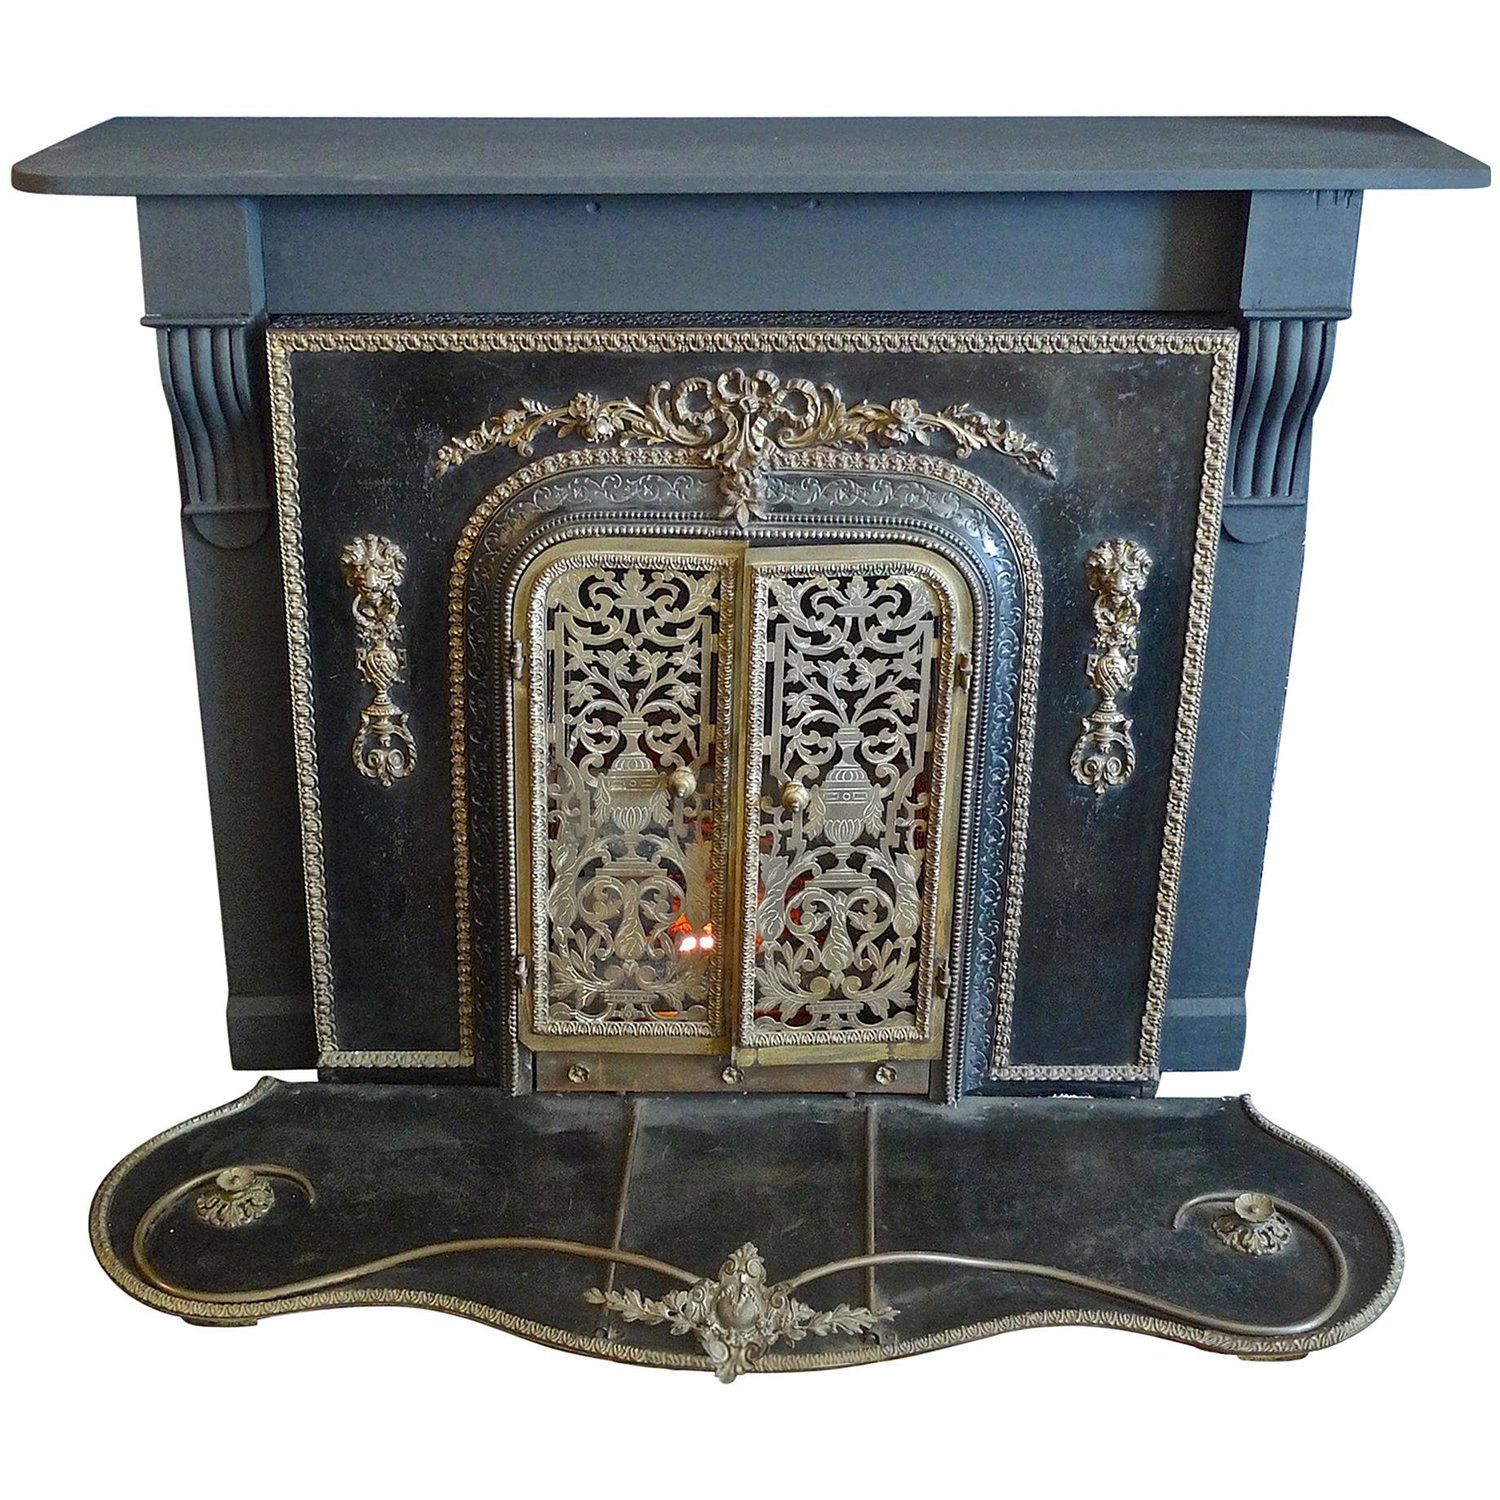 Brass Fireplace Inspirational American 1960s Metal Bronze and Wood Faux Electric Fire